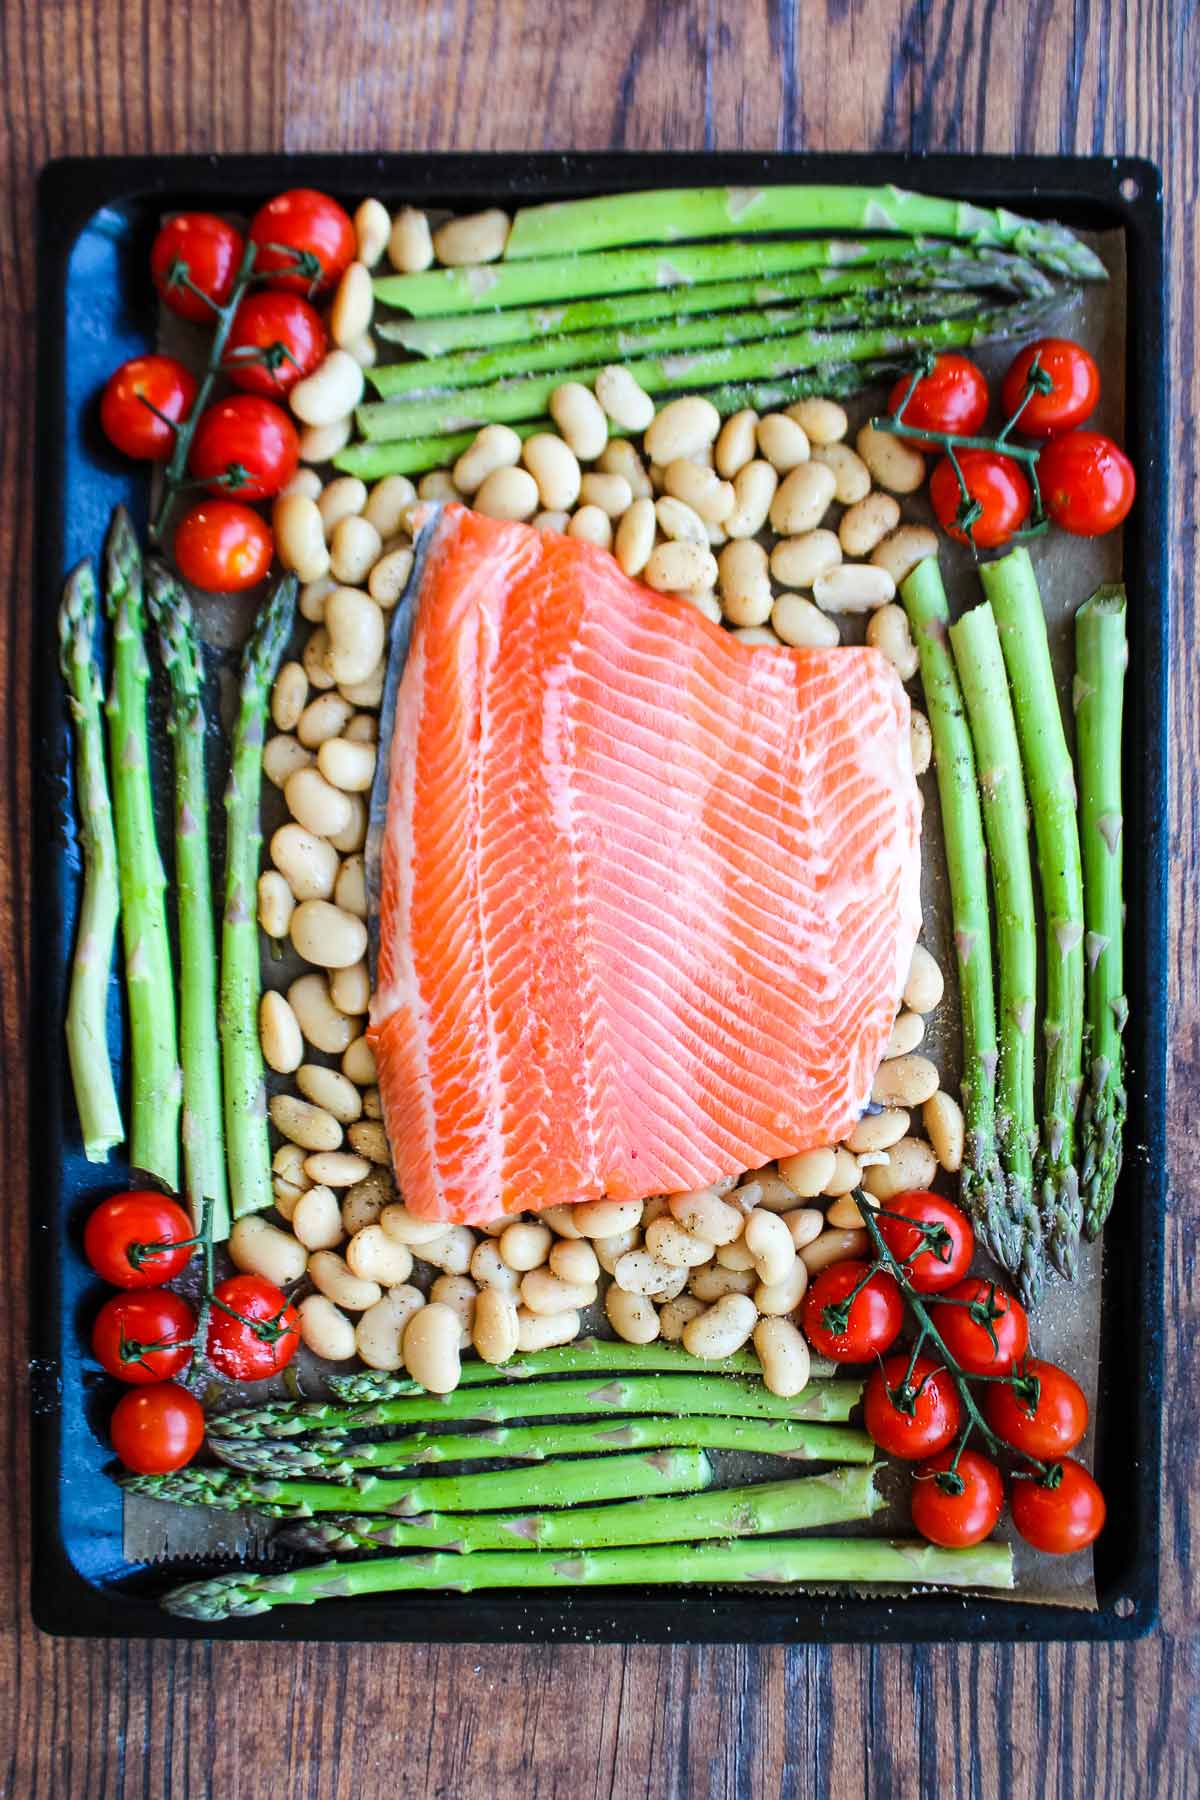 A piece of salmon placed on the sheet pan on top of the beans.